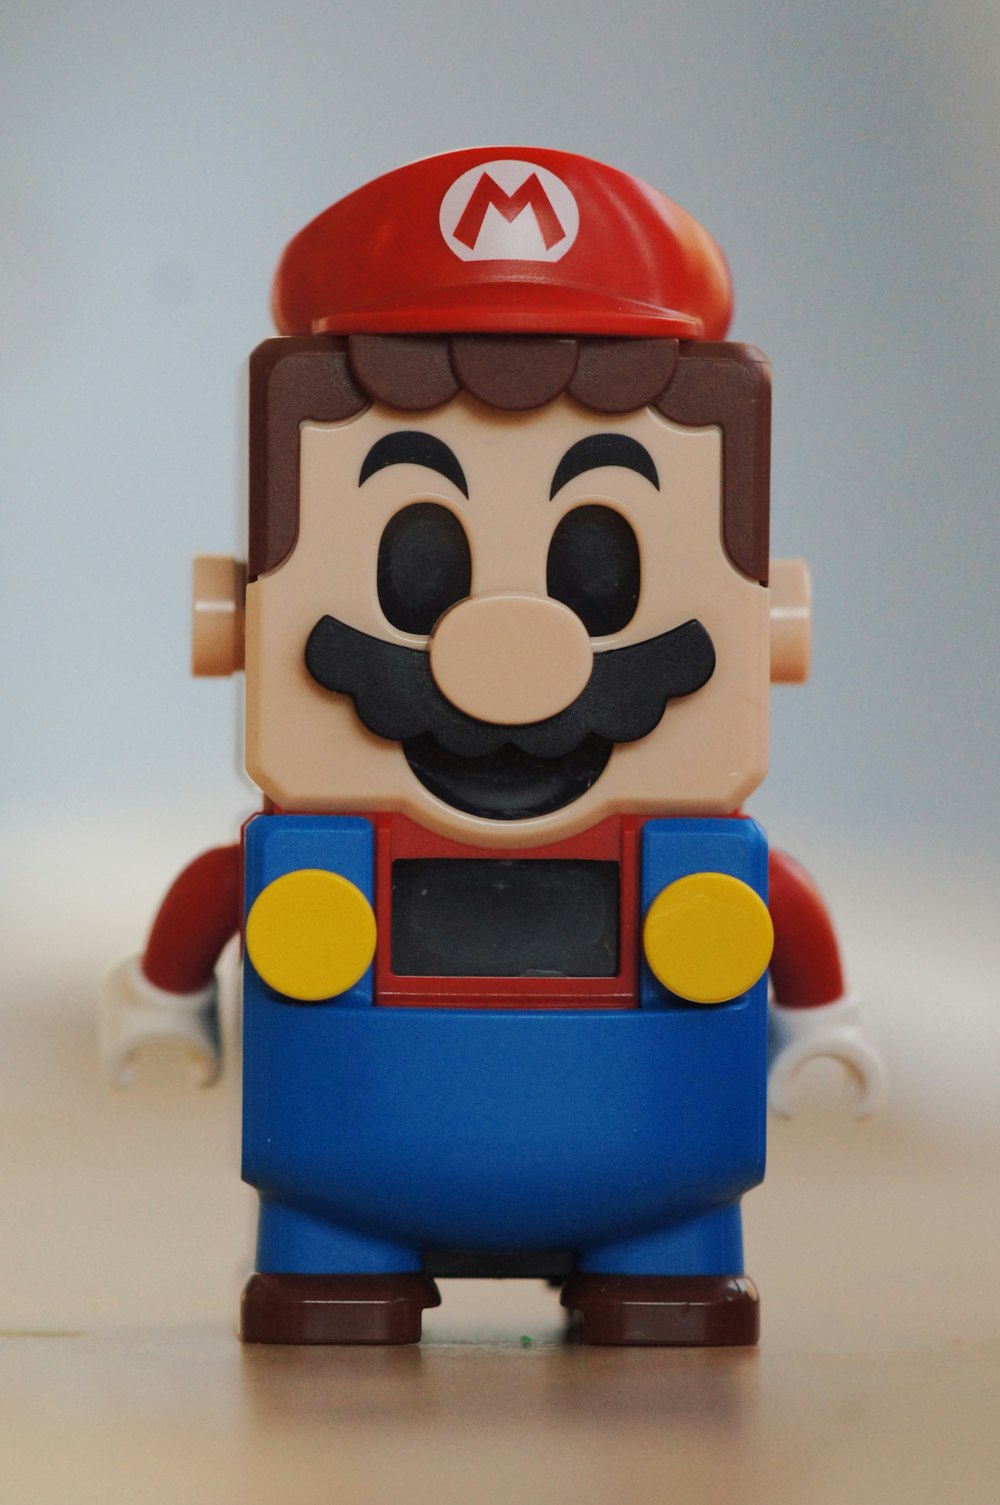 Red blue and yellow robot toy photo – Free Mario Image on Unsplash